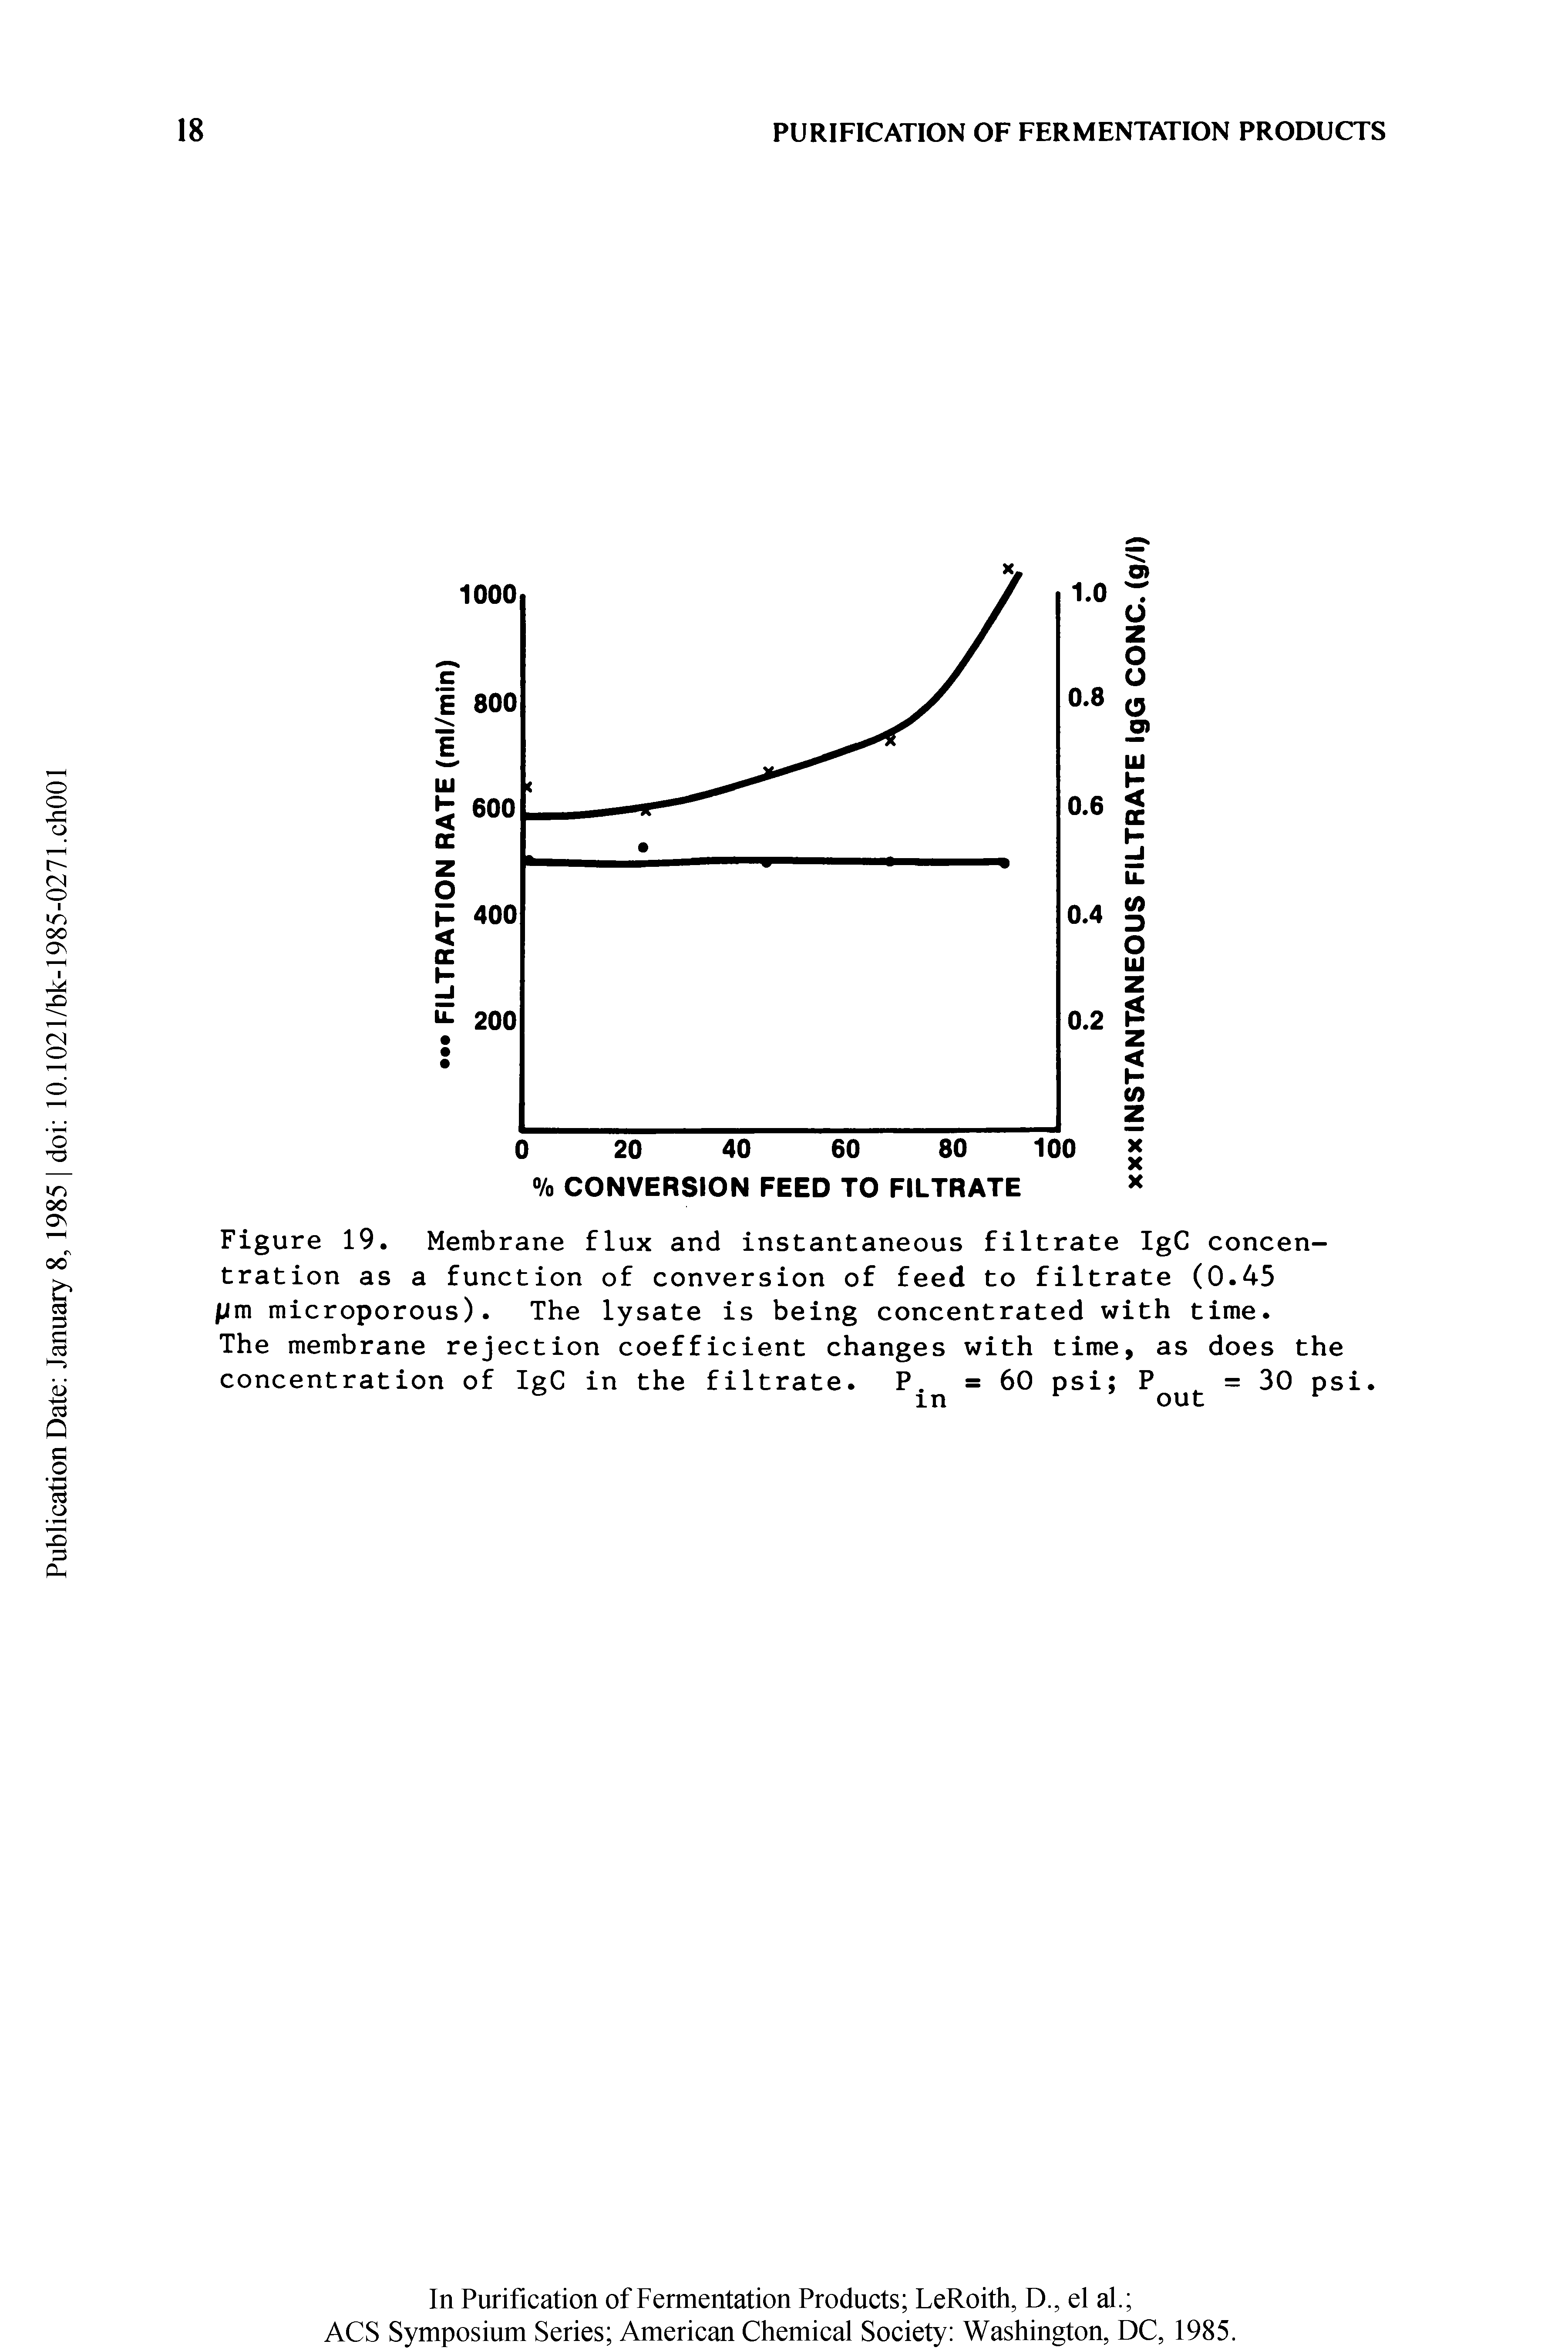 Figure 19. Membrane flux and instantaneous filtrate IgC concentration as a function of conversion of feed to filtrate (0.45 fjm microporous). The lysate is being concentrated with time.